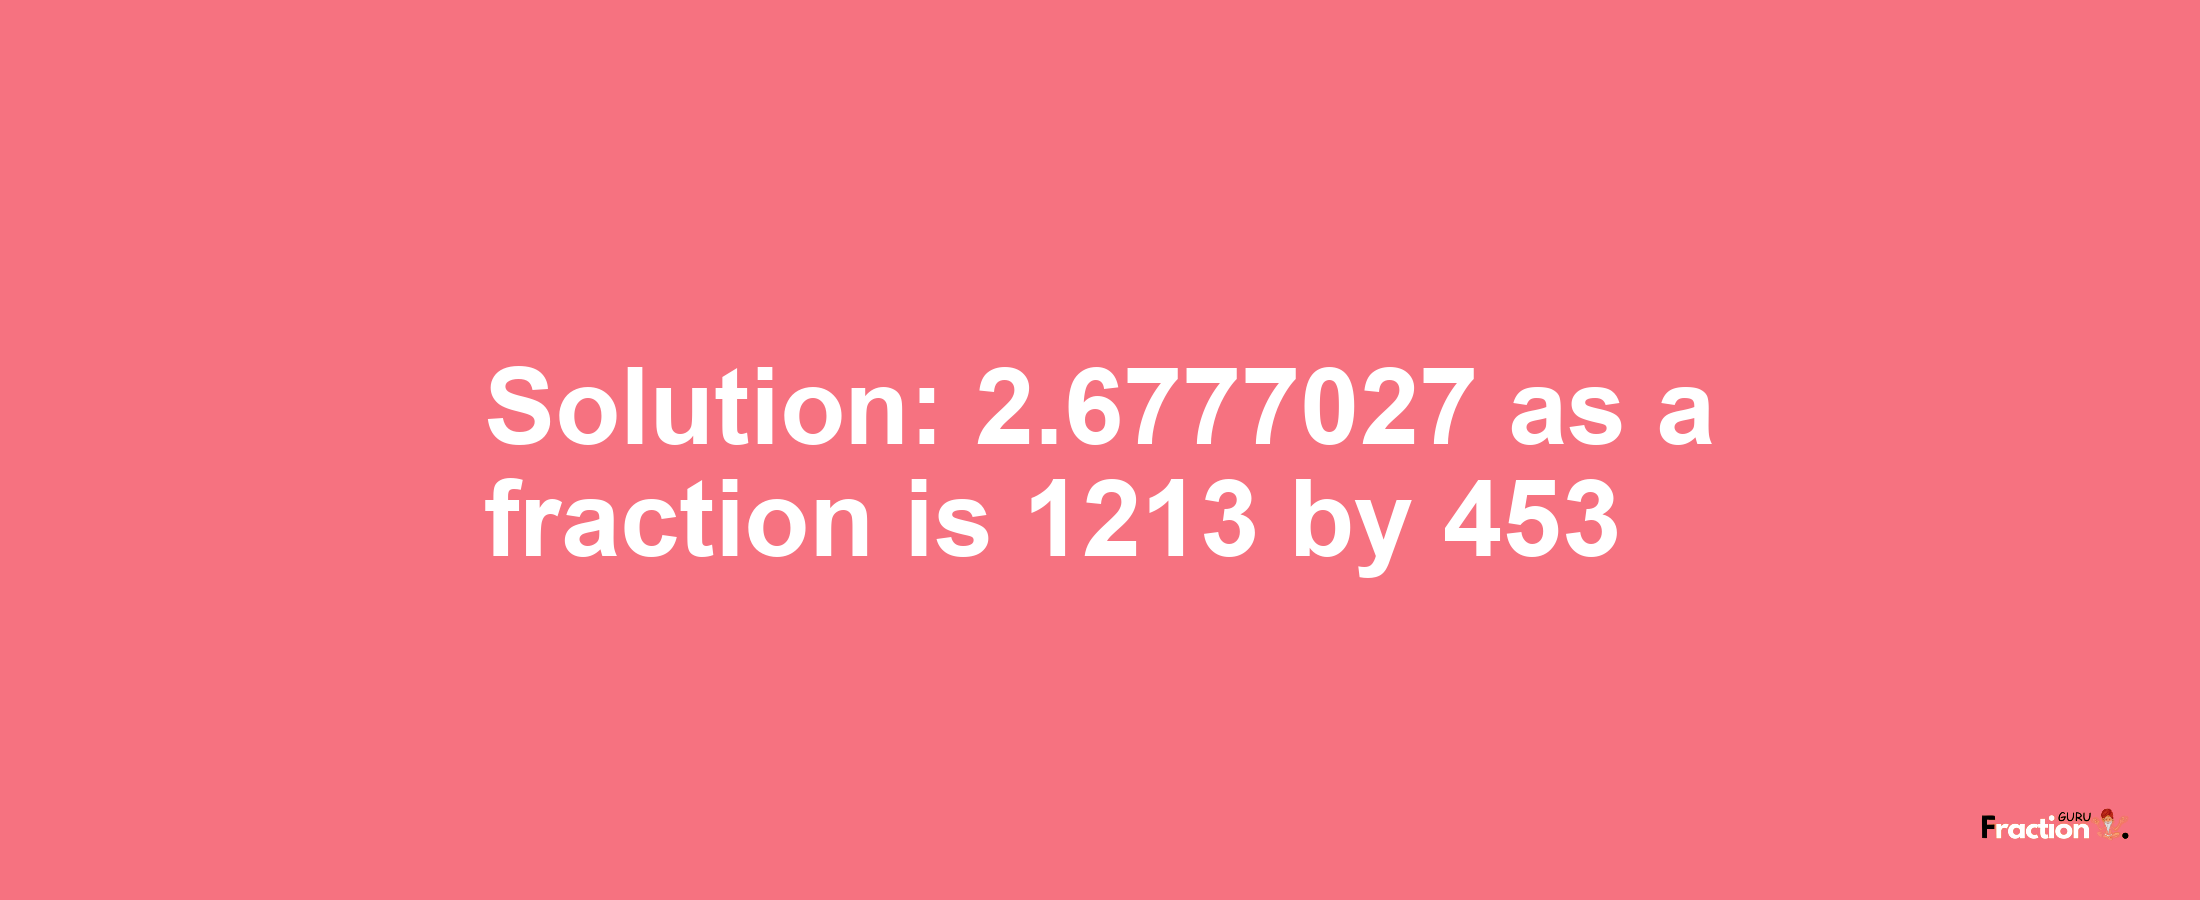 Solution:2.6777027 as a fraction is 1213/453